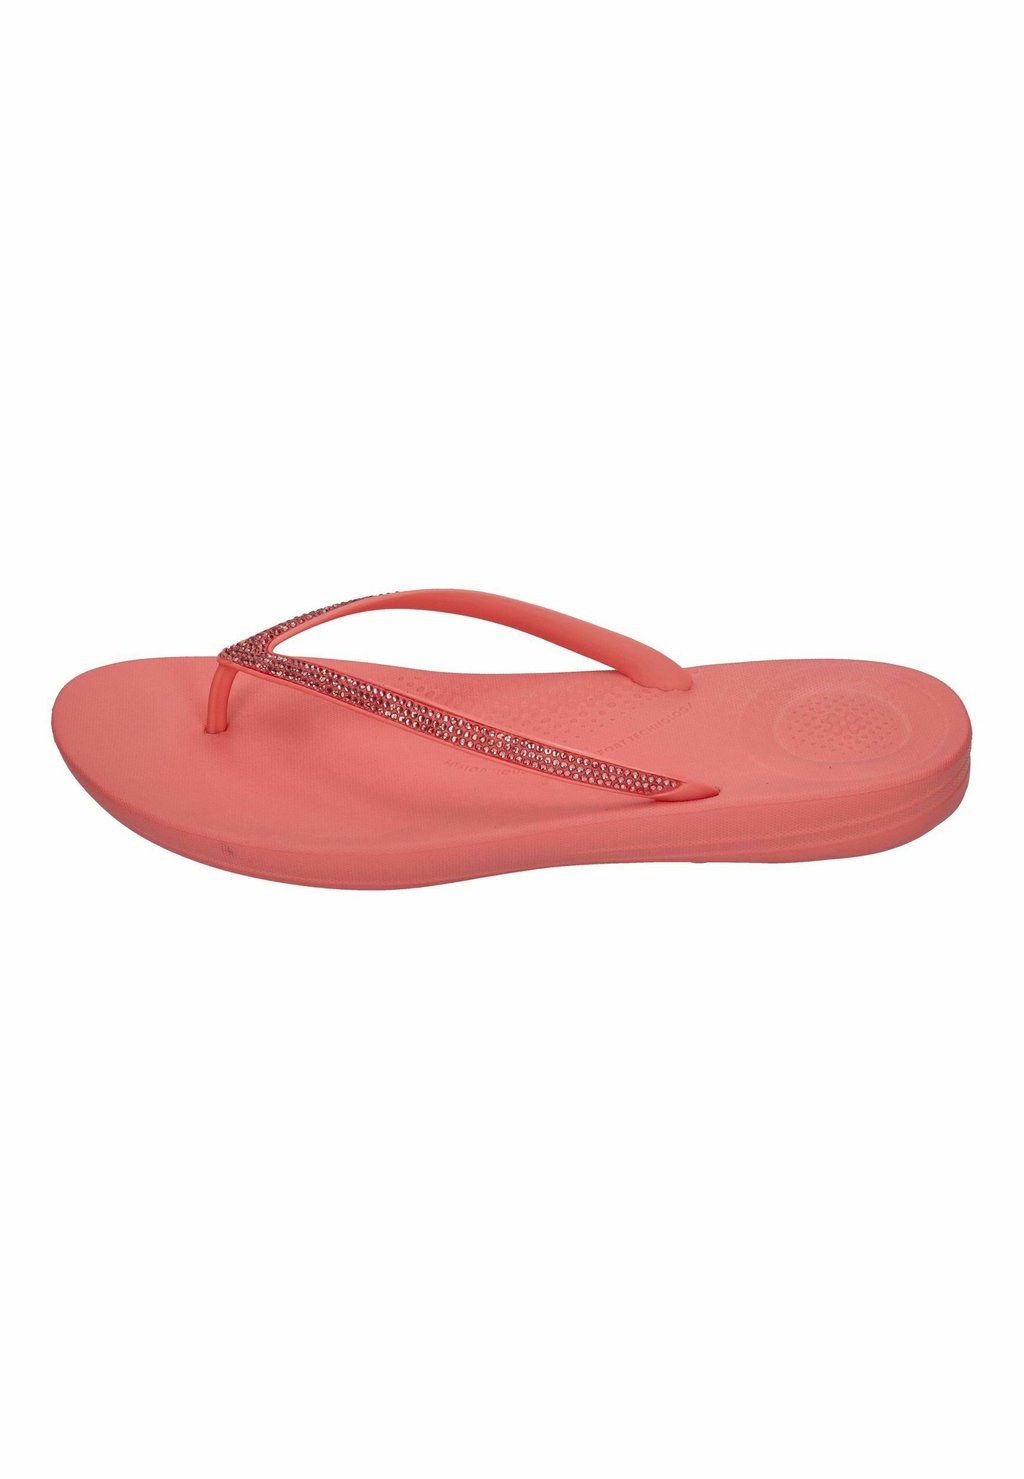 Сандалии ZEHENTRENNER IQUSHION SPARKLE R08 FitFlop, цвет rosy coral rosy hug ensemble